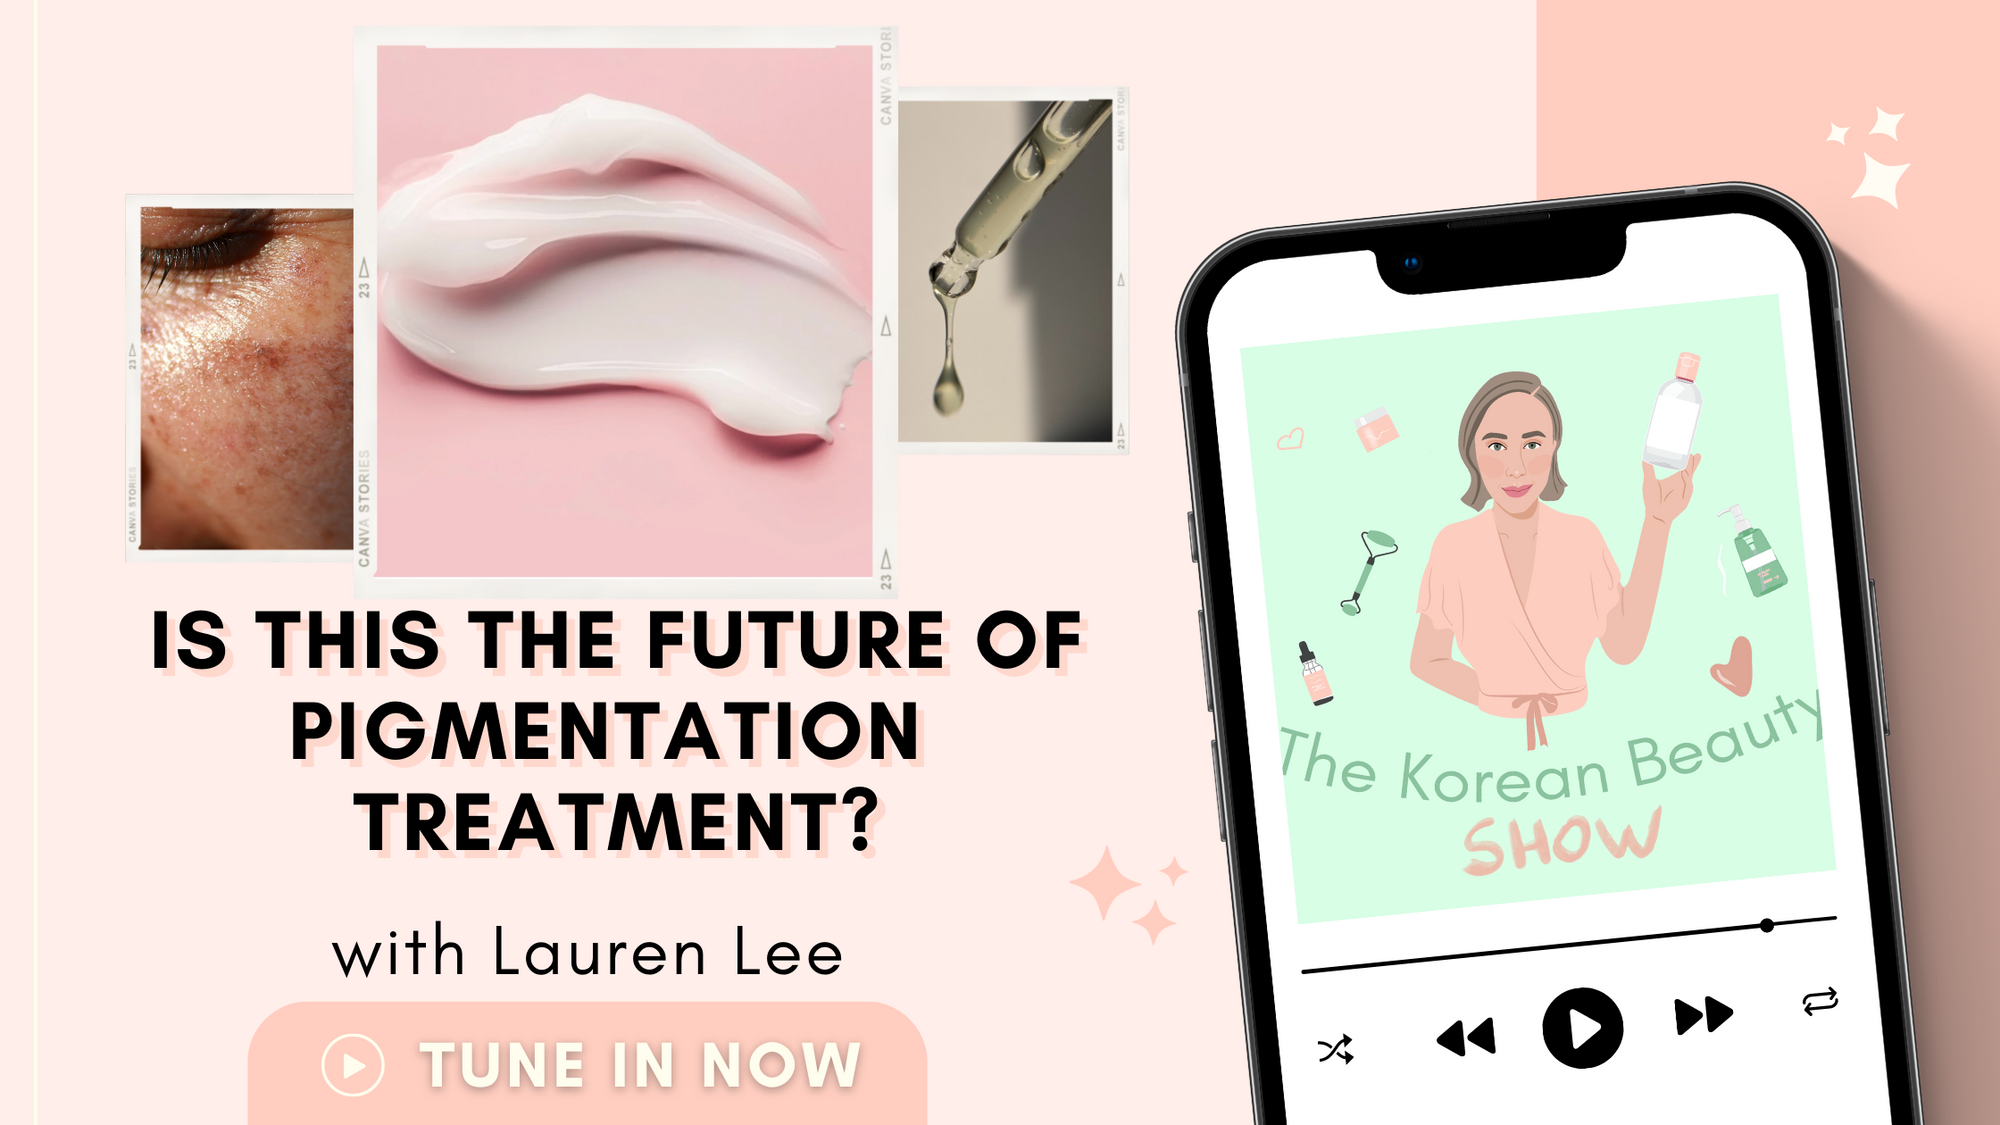 Is This The Future of Pigmentation Treatment?